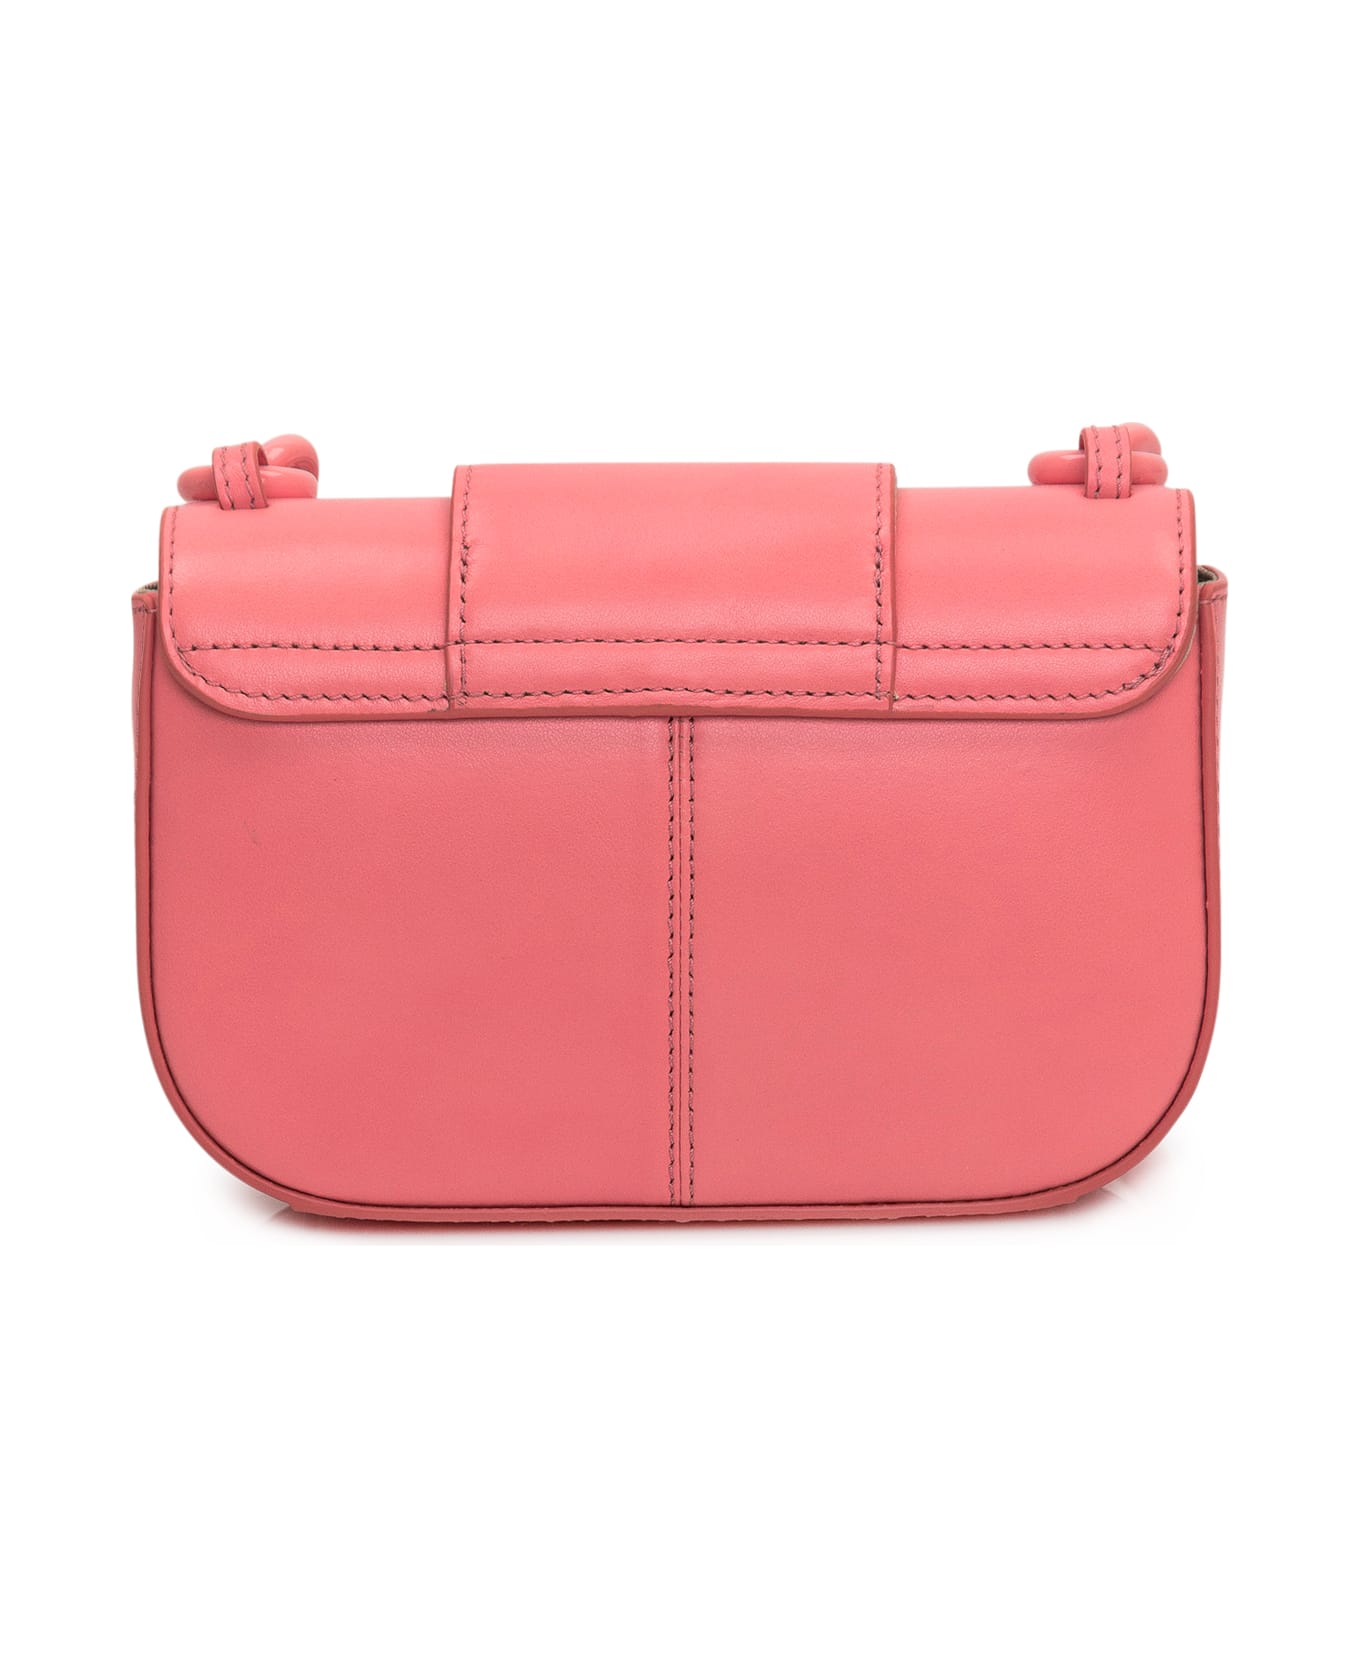 See by Chloé Hana Bag - SUNSET PINK トートバッグ